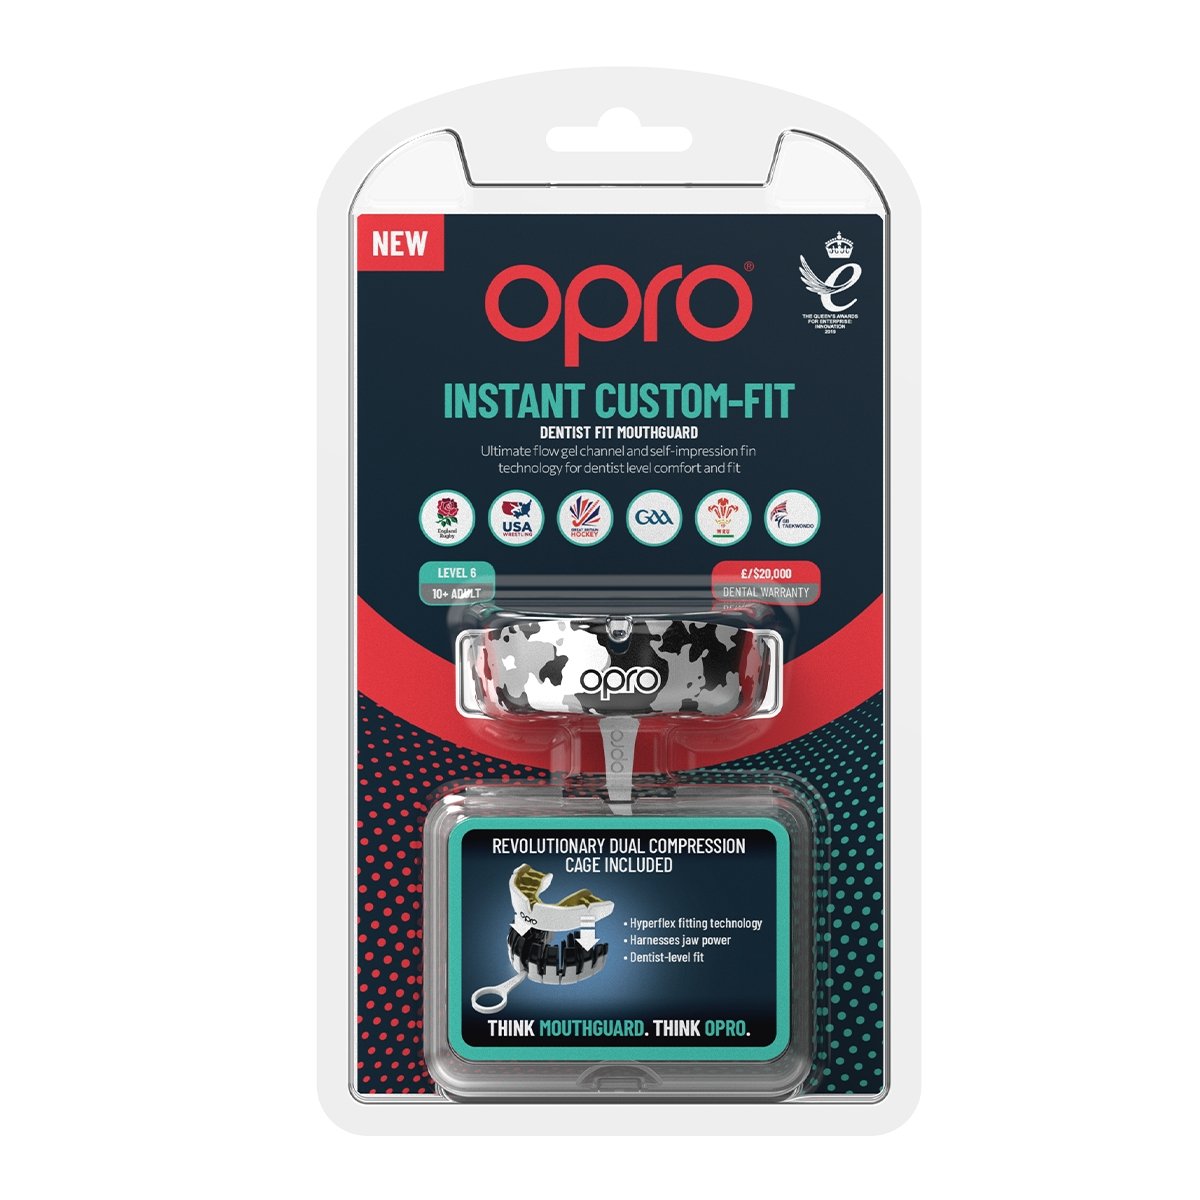 Protector Bucal Profesional Opro Instan Custom Fit Exclusive edition - Redglove 